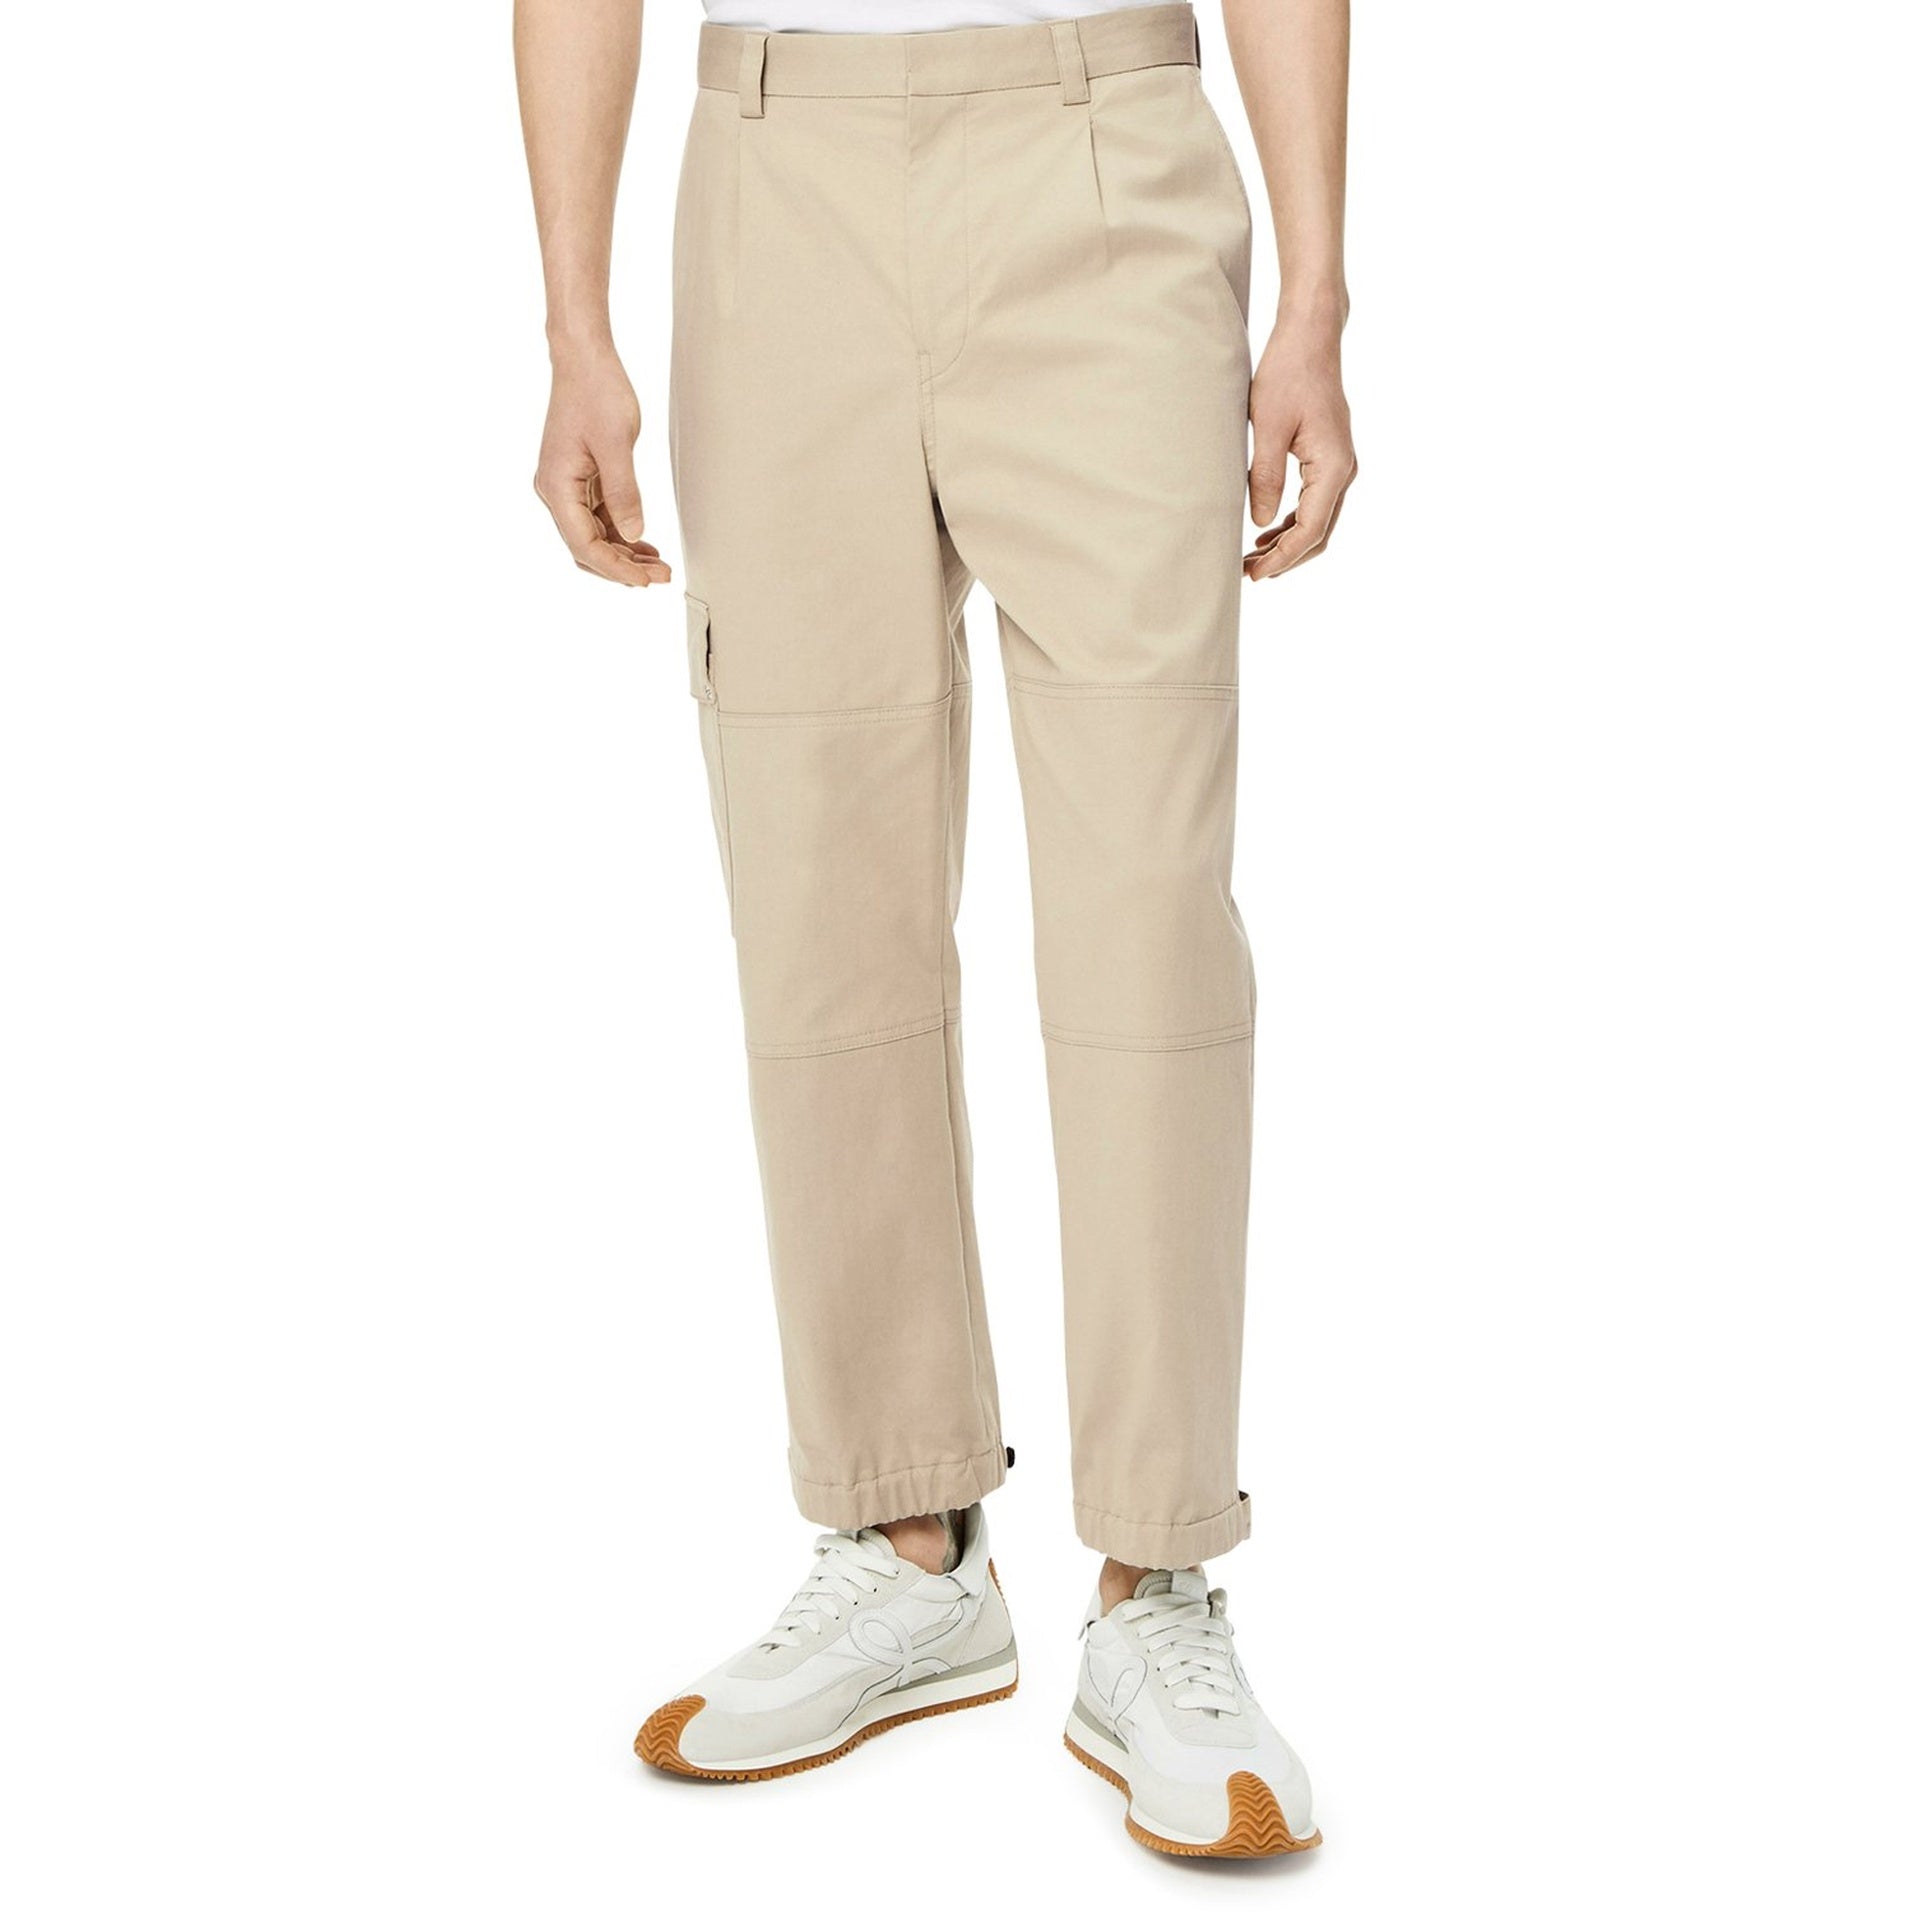 LOEWE-OUTLET-SALE-Loewe-Cropped-Cargo-Trousers-Hosen-ARCHIVE-COLLECTION-2.jpg